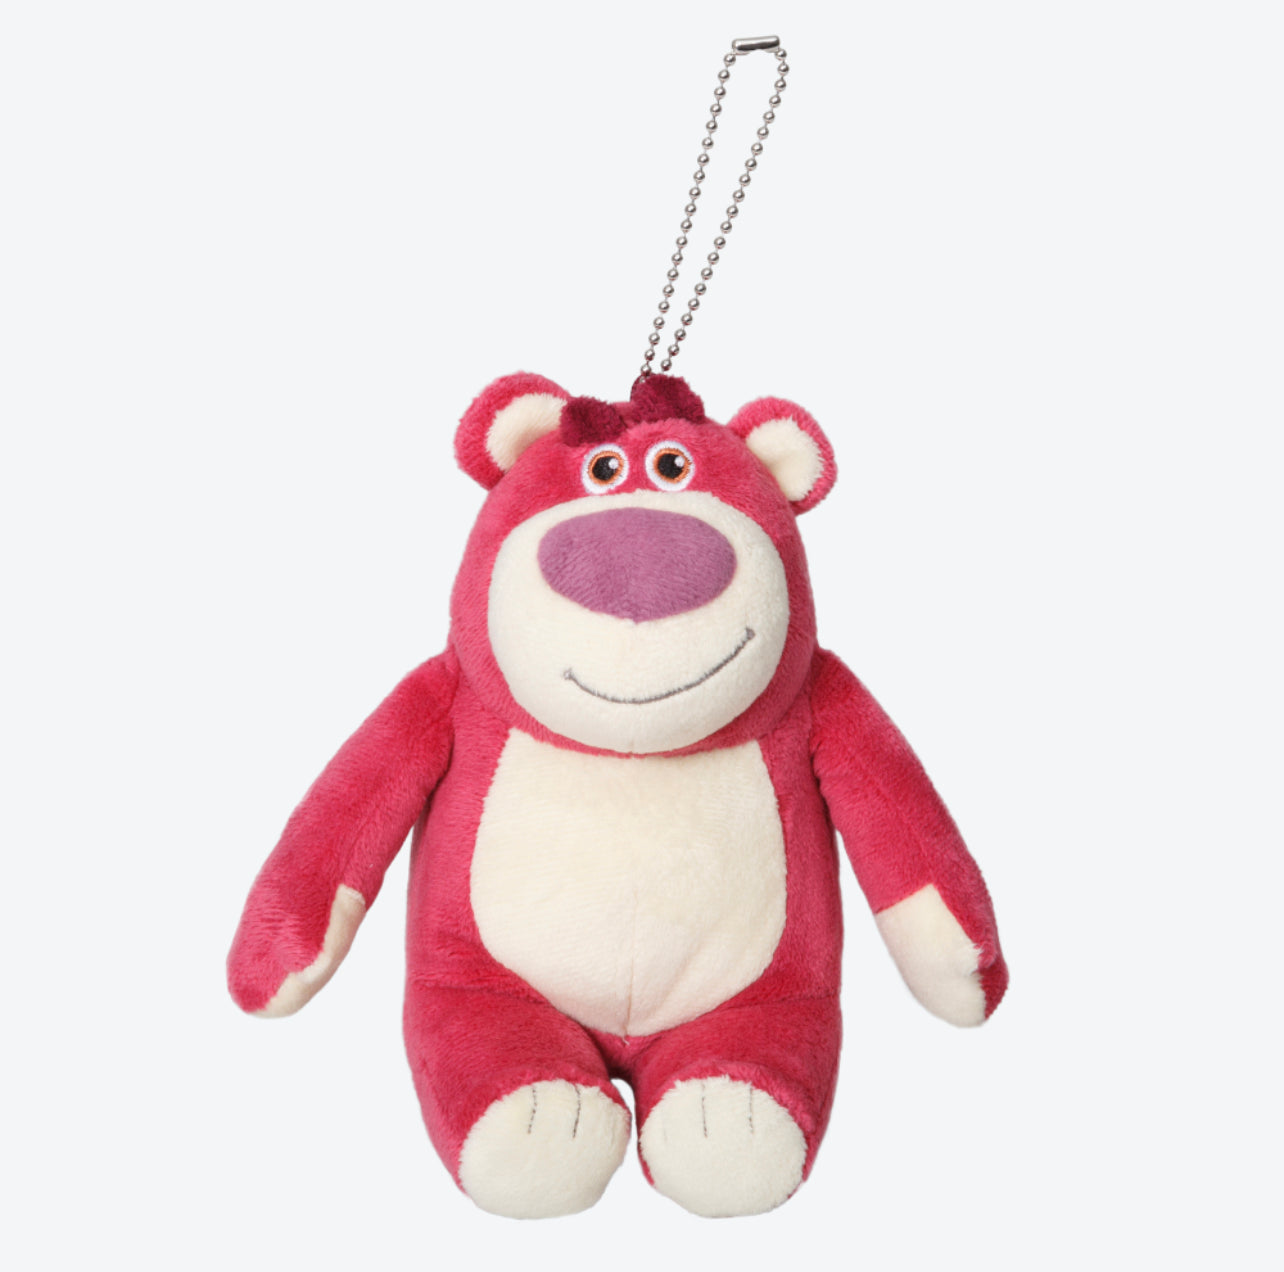 TDR - Plush Keychain x Lotso (With Strawberries Smell)